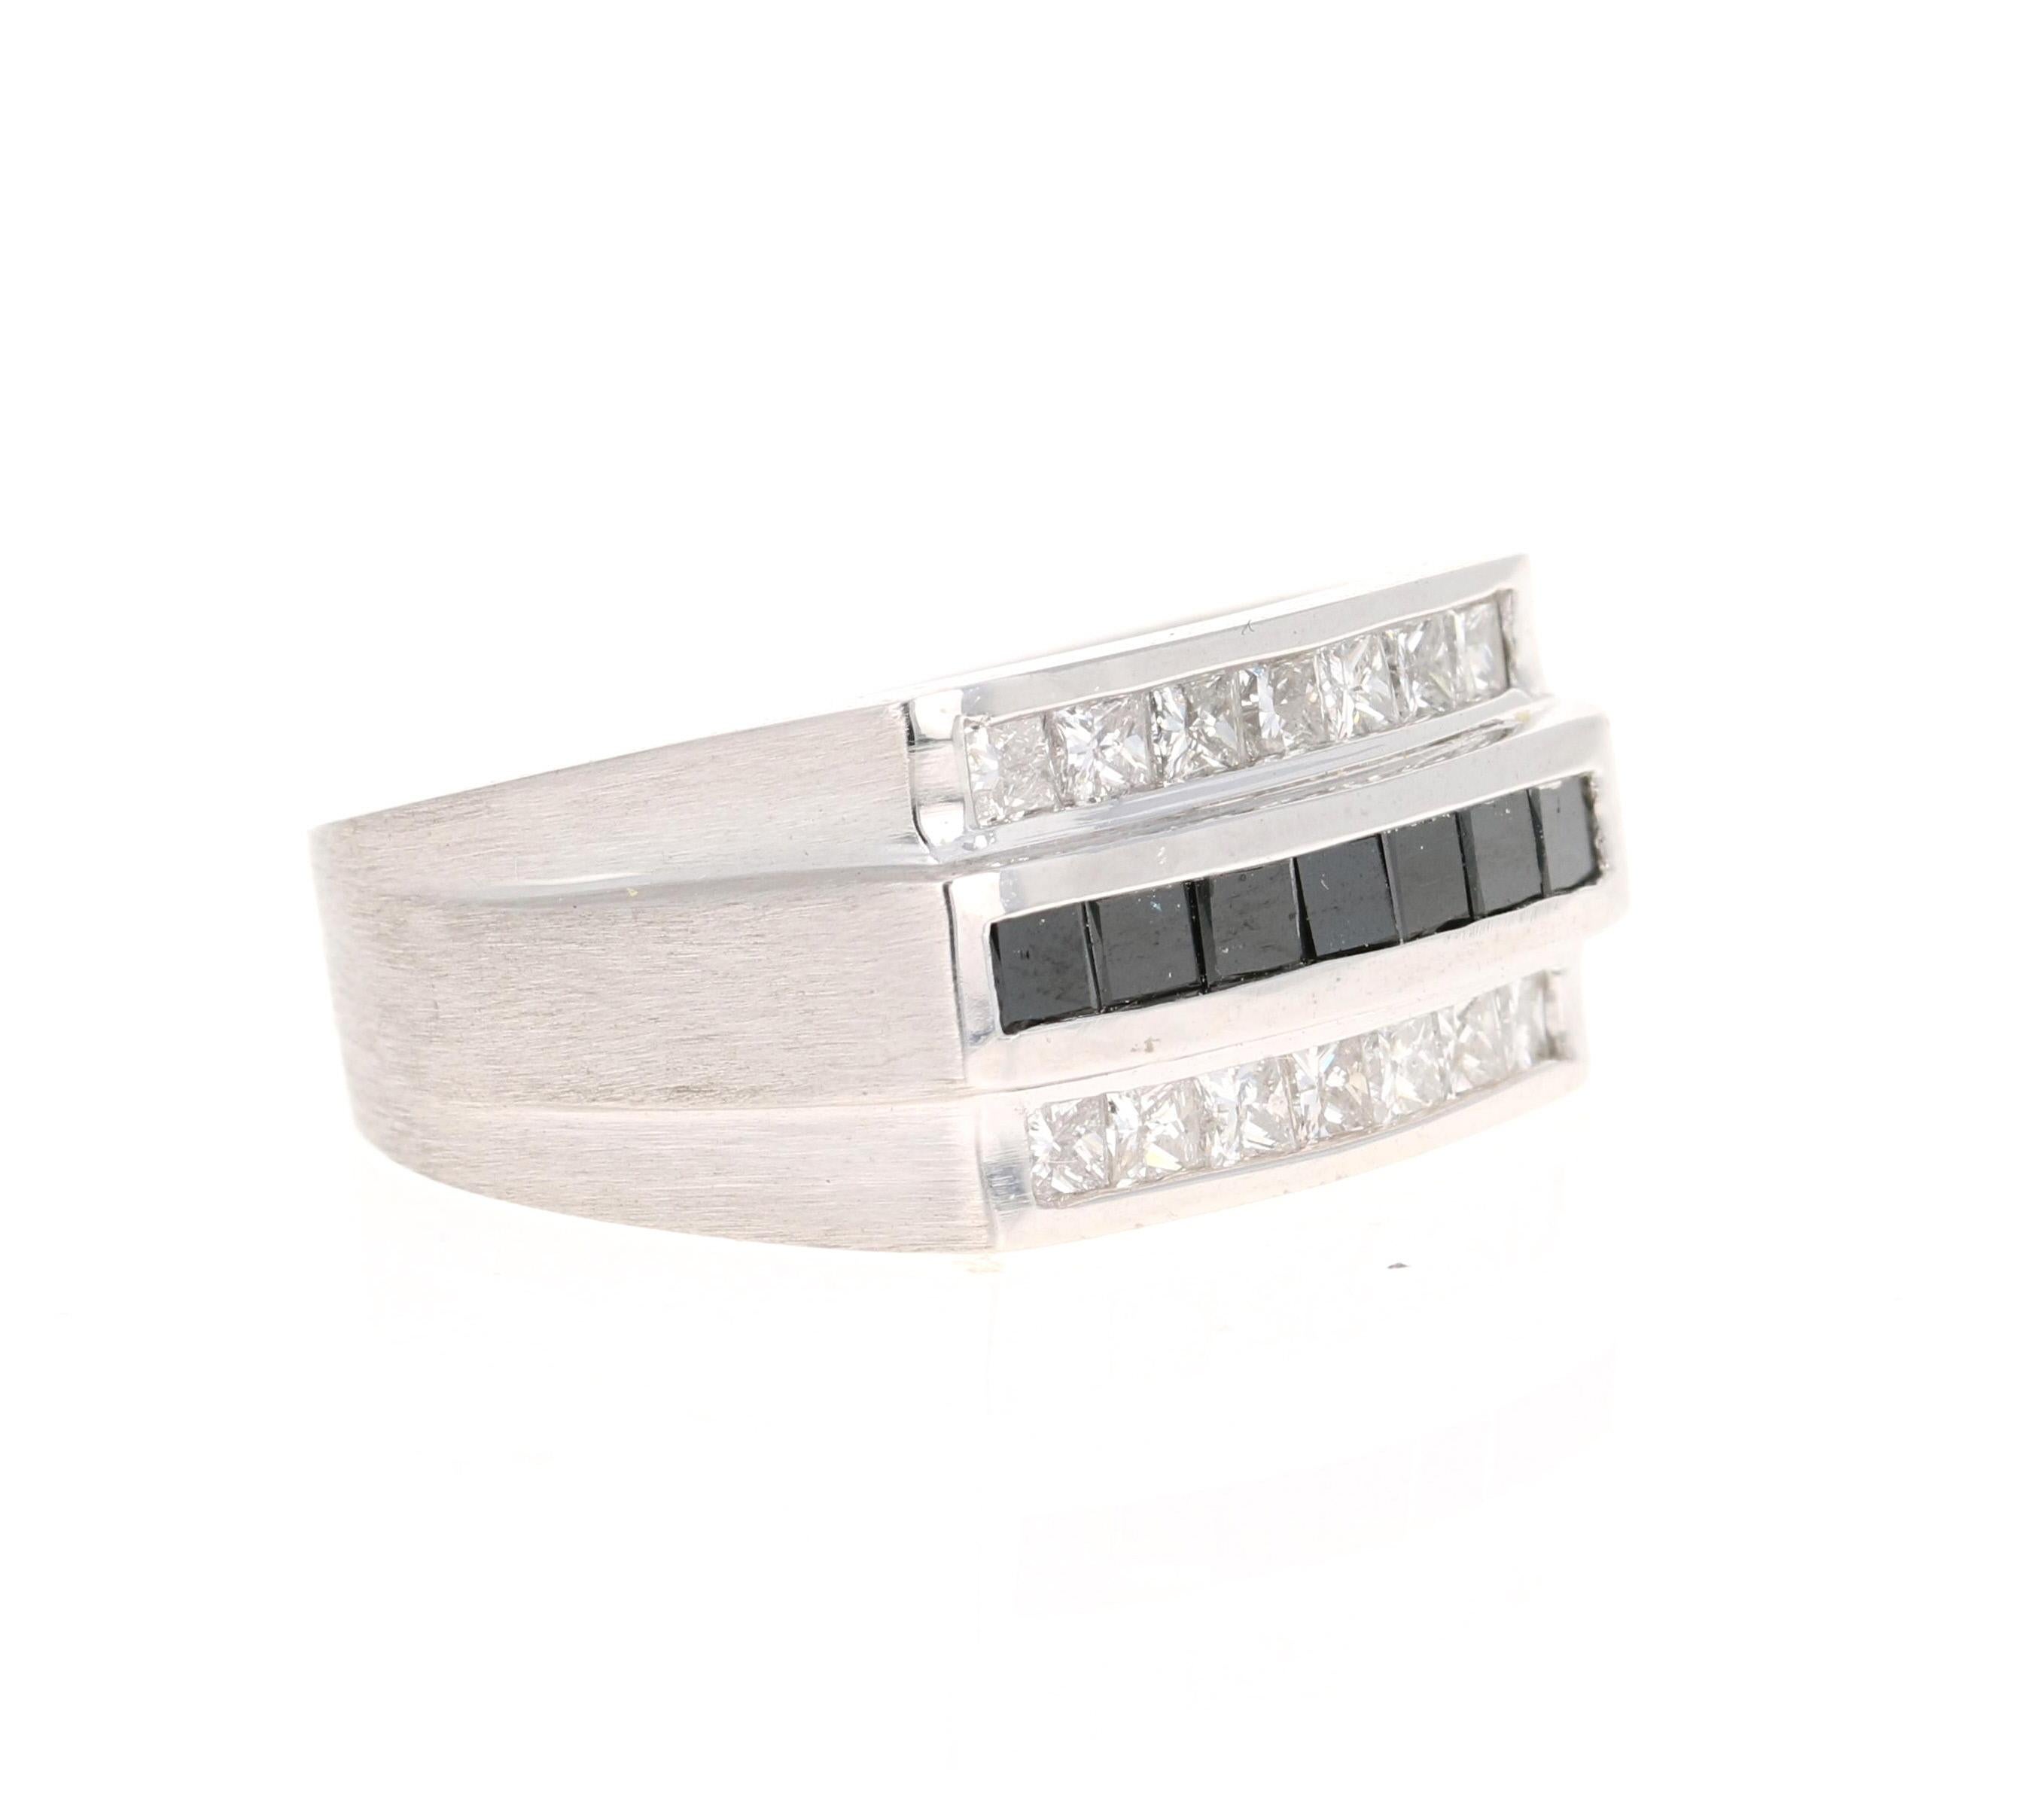 This ring is set with 14 Princess Cut White Diamonds that weight 0.91 carats and 7 Princess Cut Black Diamonds that weigh 0.55 carats. The total carat weight of the ring is 1.46 carats. 

It is beautifully curated in 14 Karat White Gold and weighs